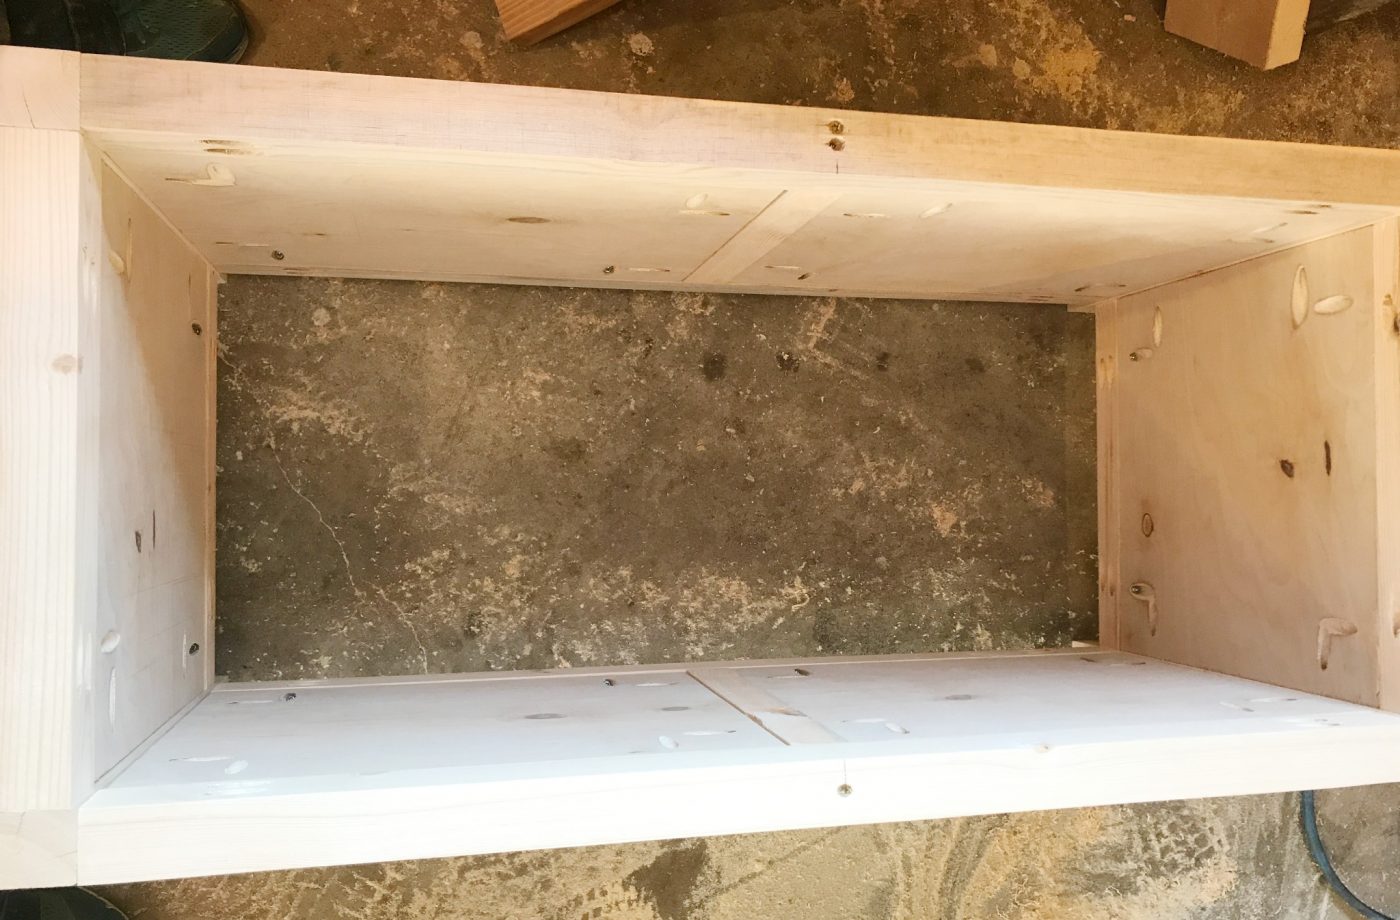 Add side panels to the DIY storage chest frame